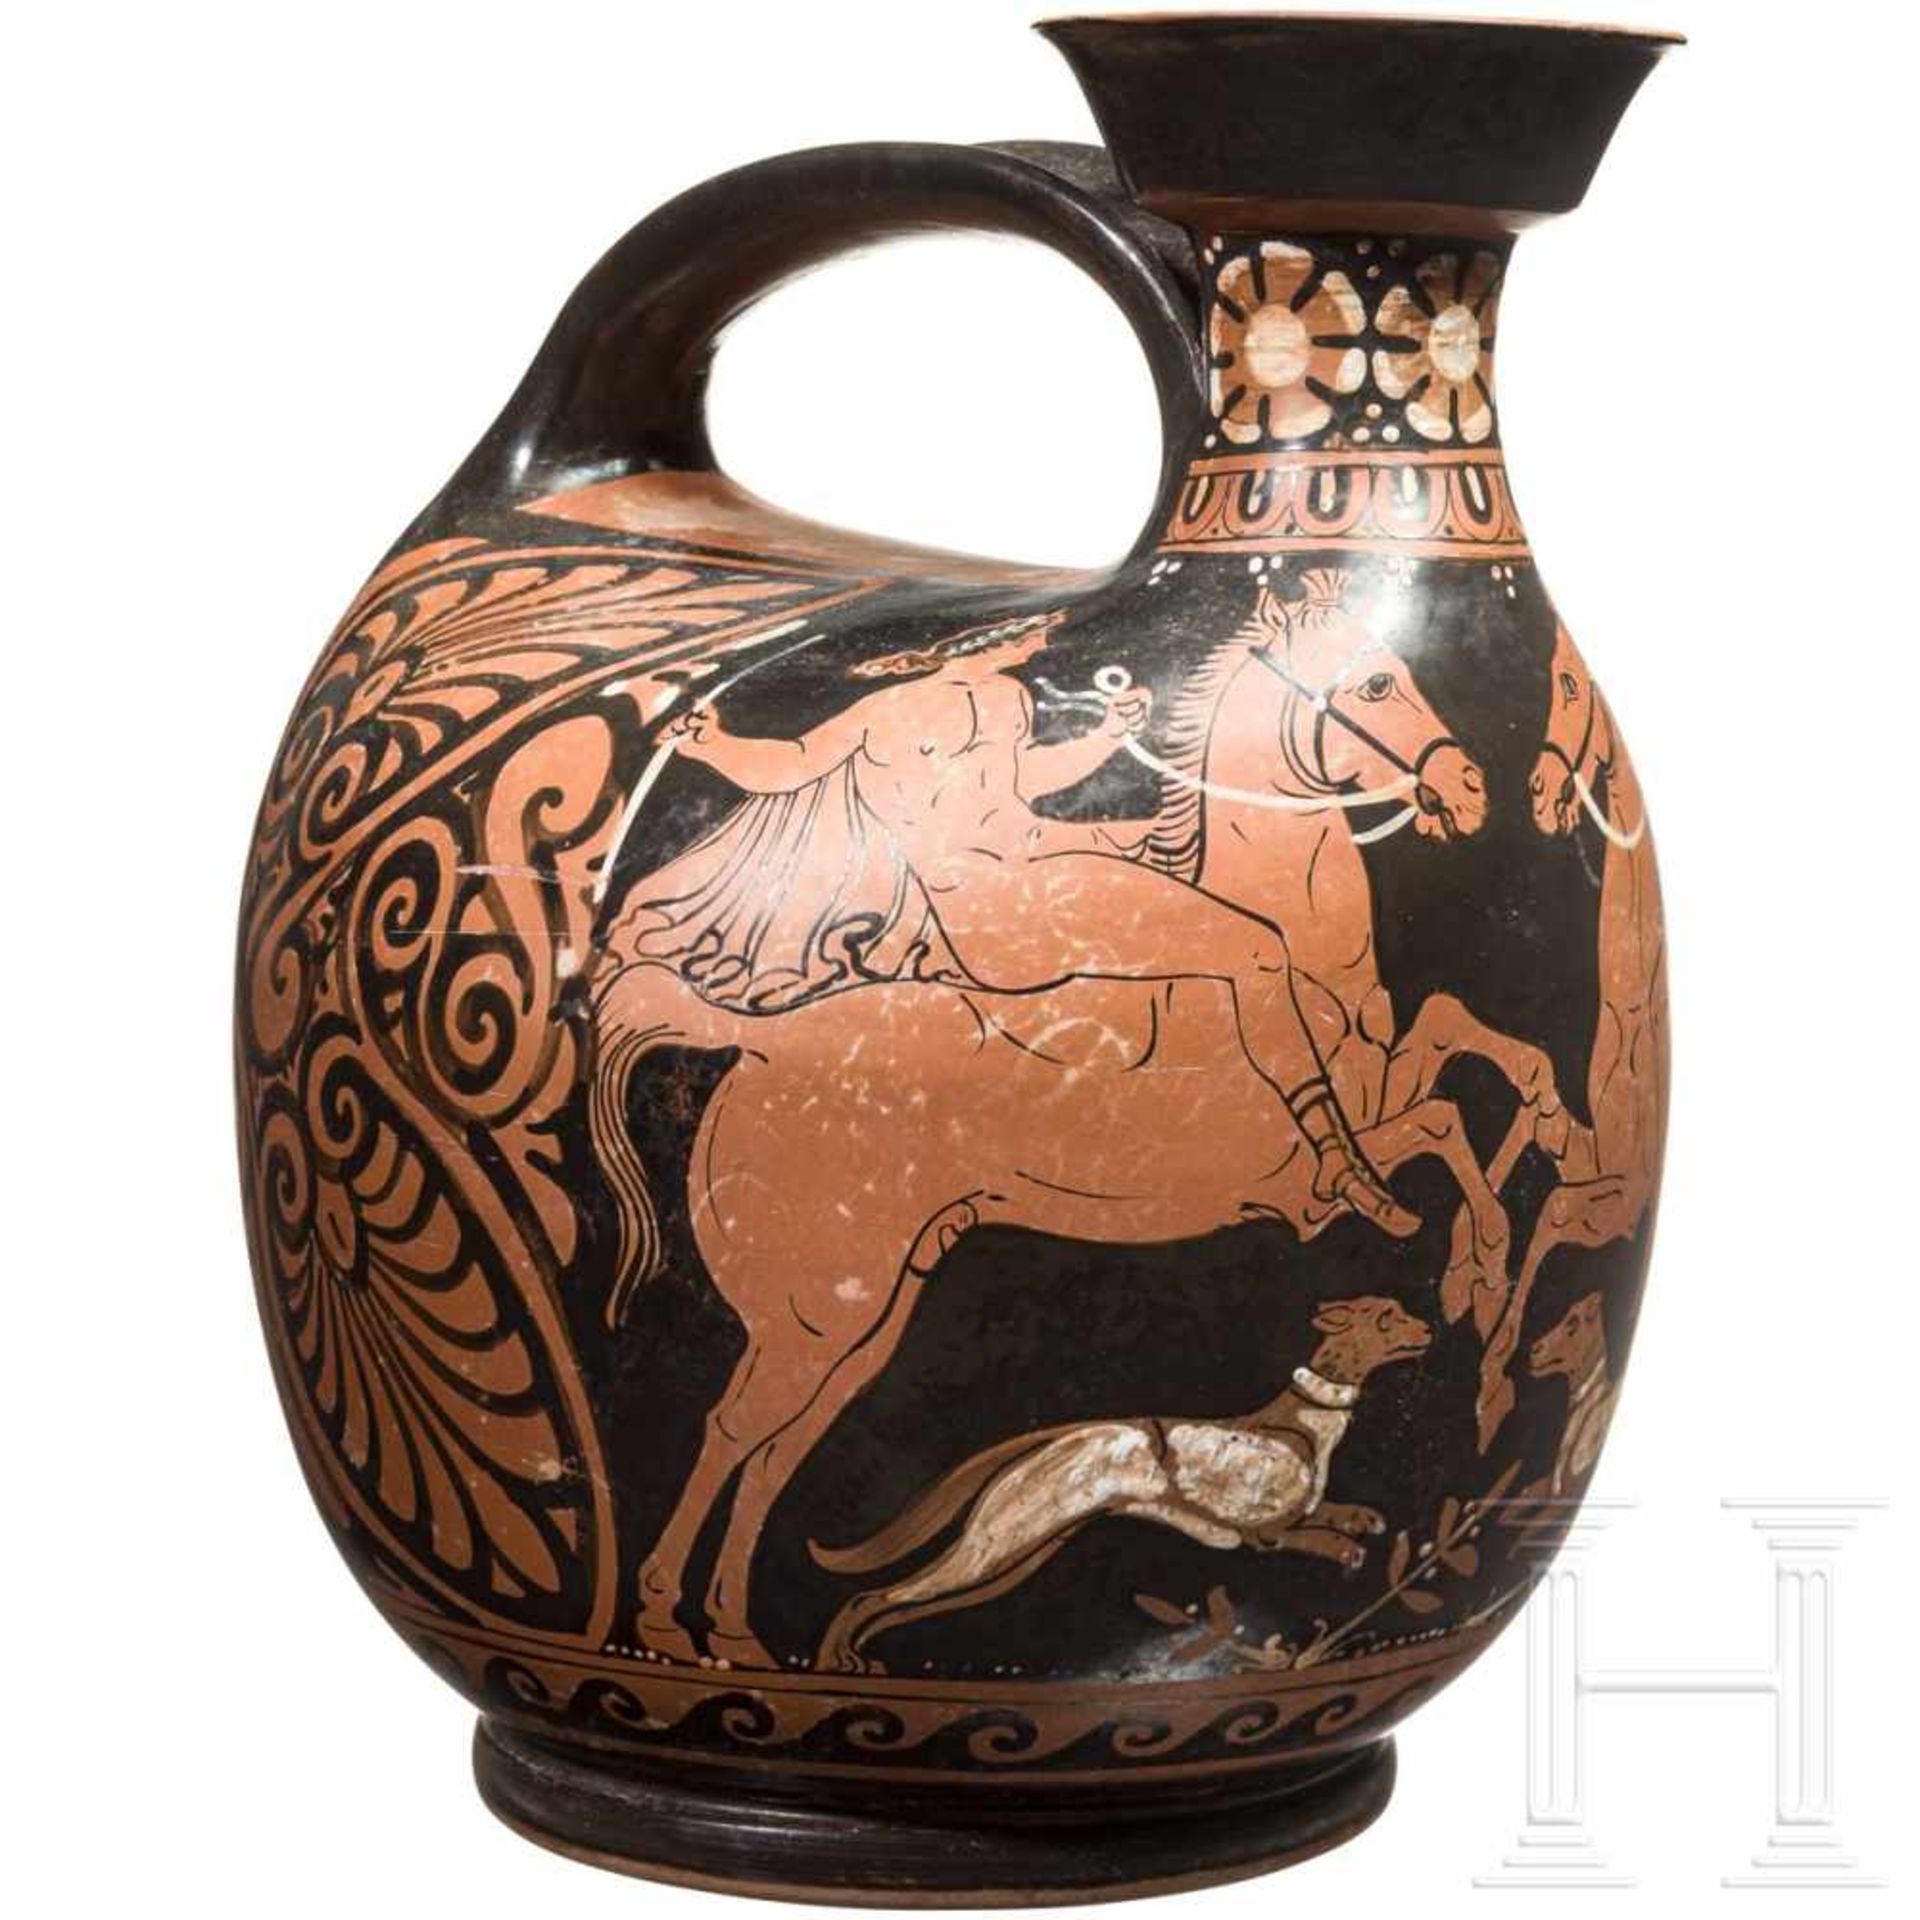 A high quality imitation of an Askos with a red figure rider sceneRed figure Askos each with a naked